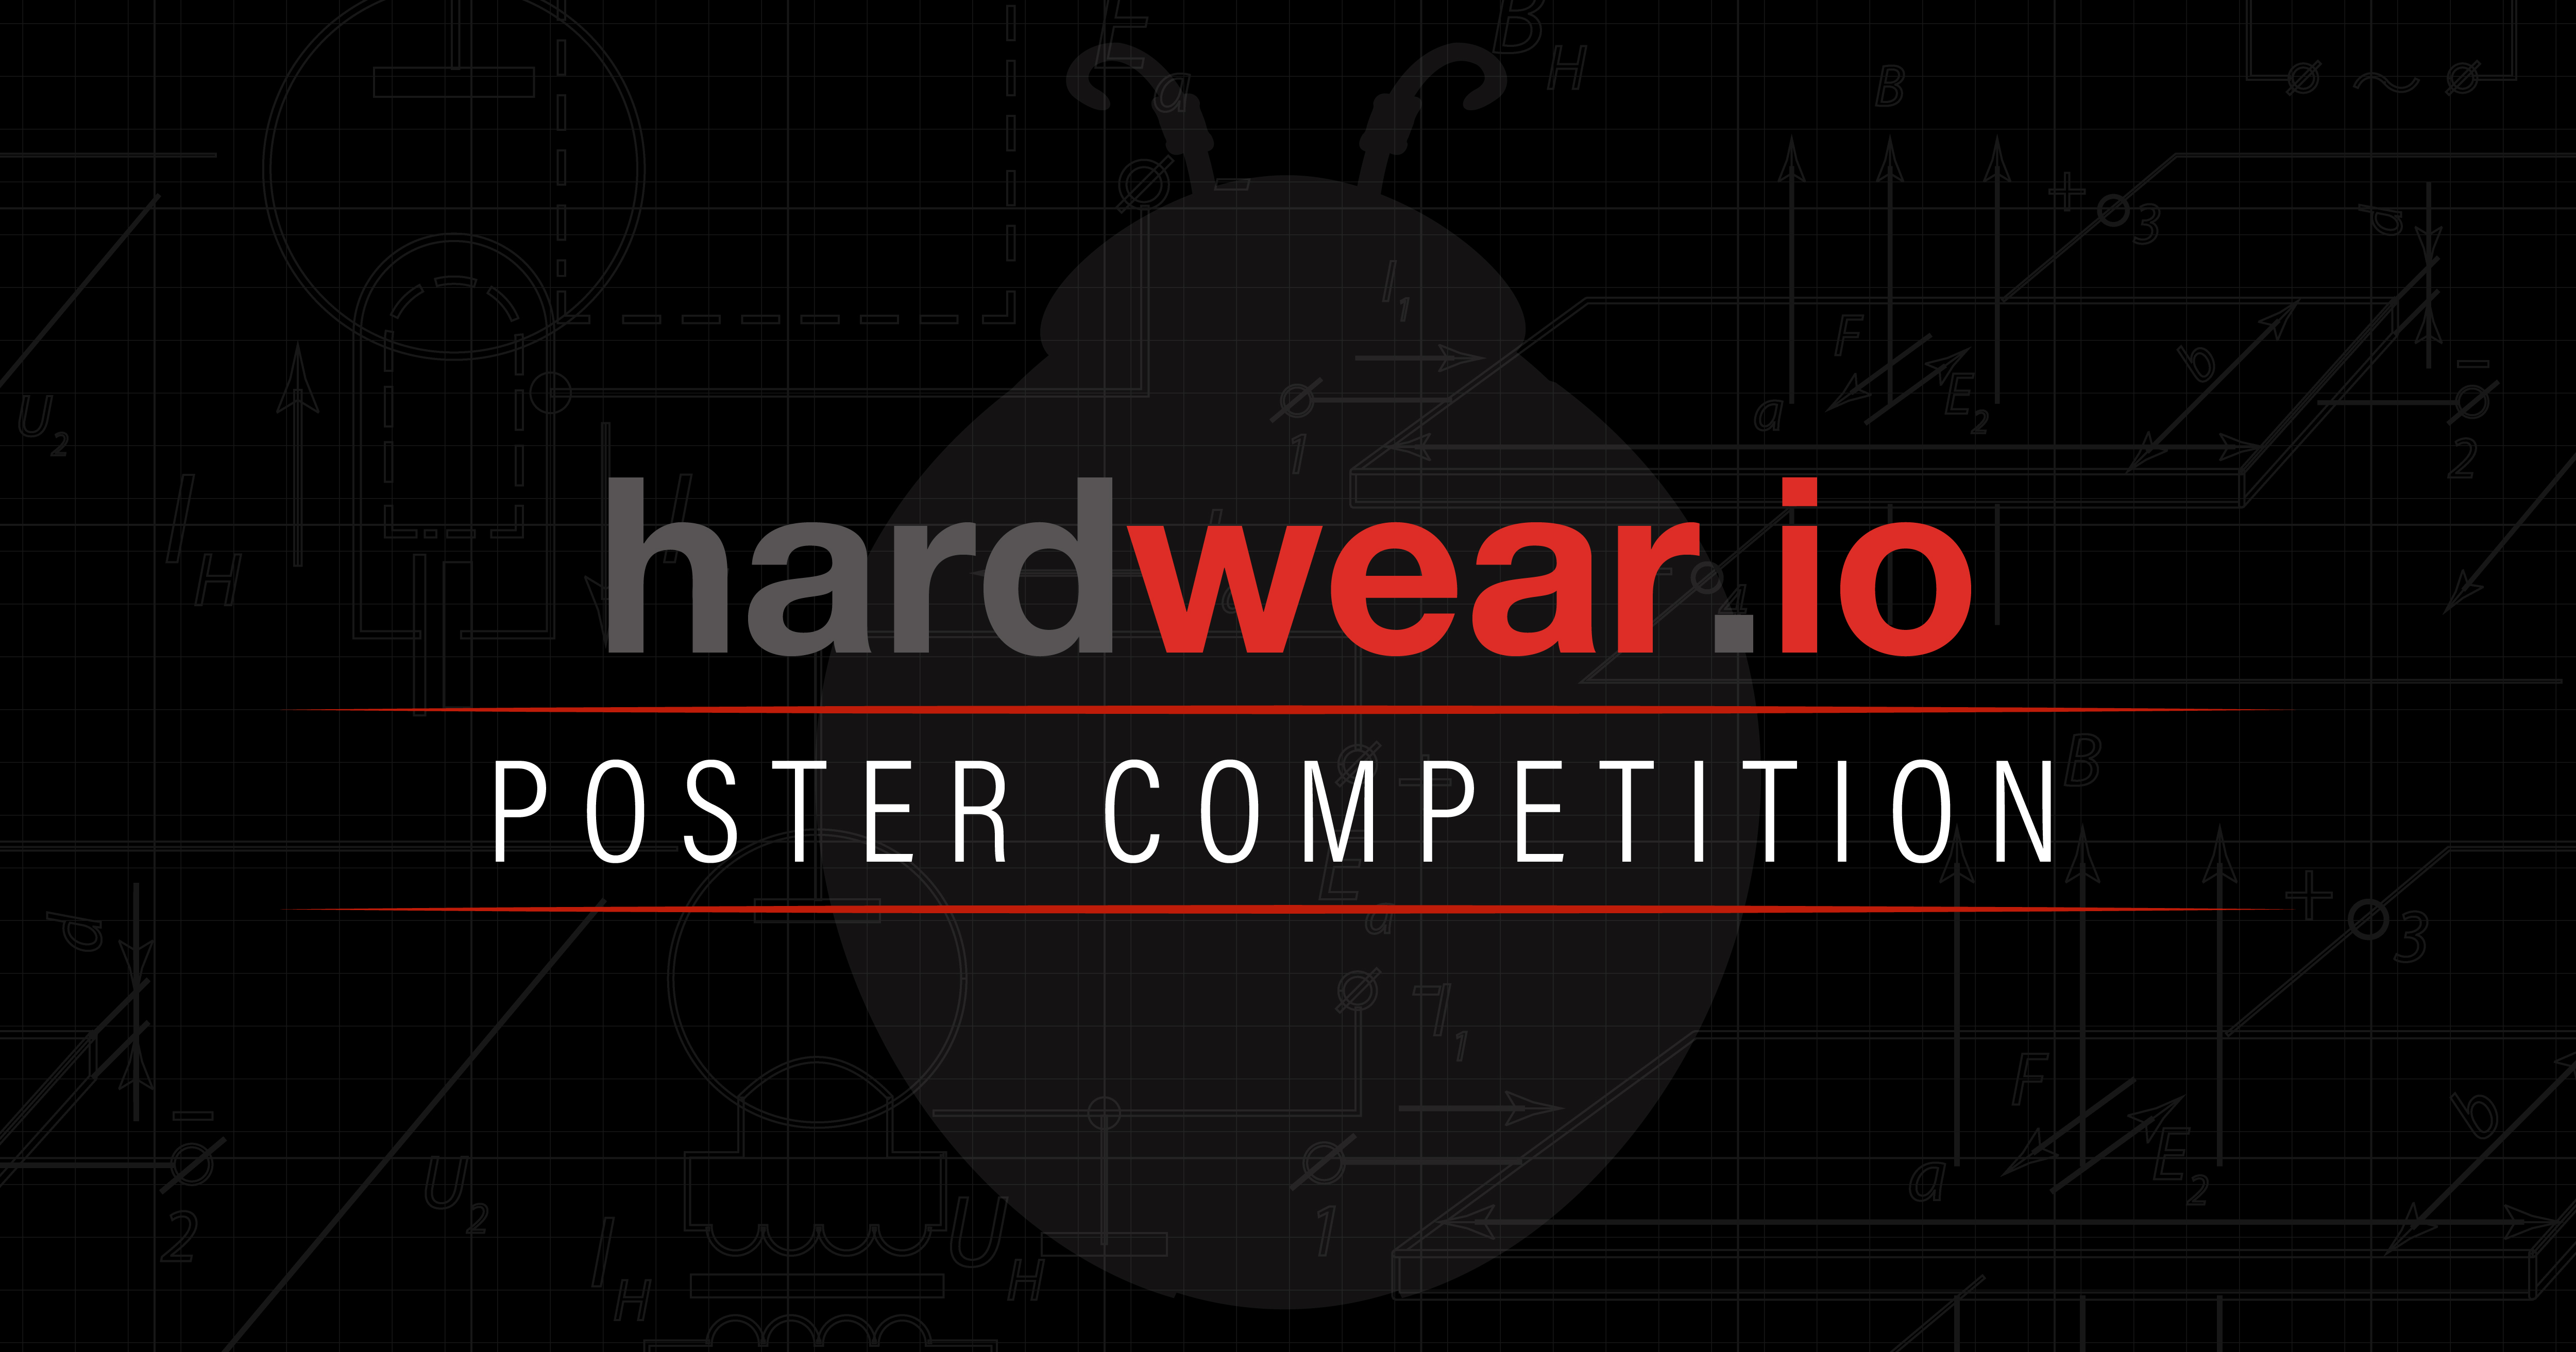 poster competition | hardwear.io netherlands 2020